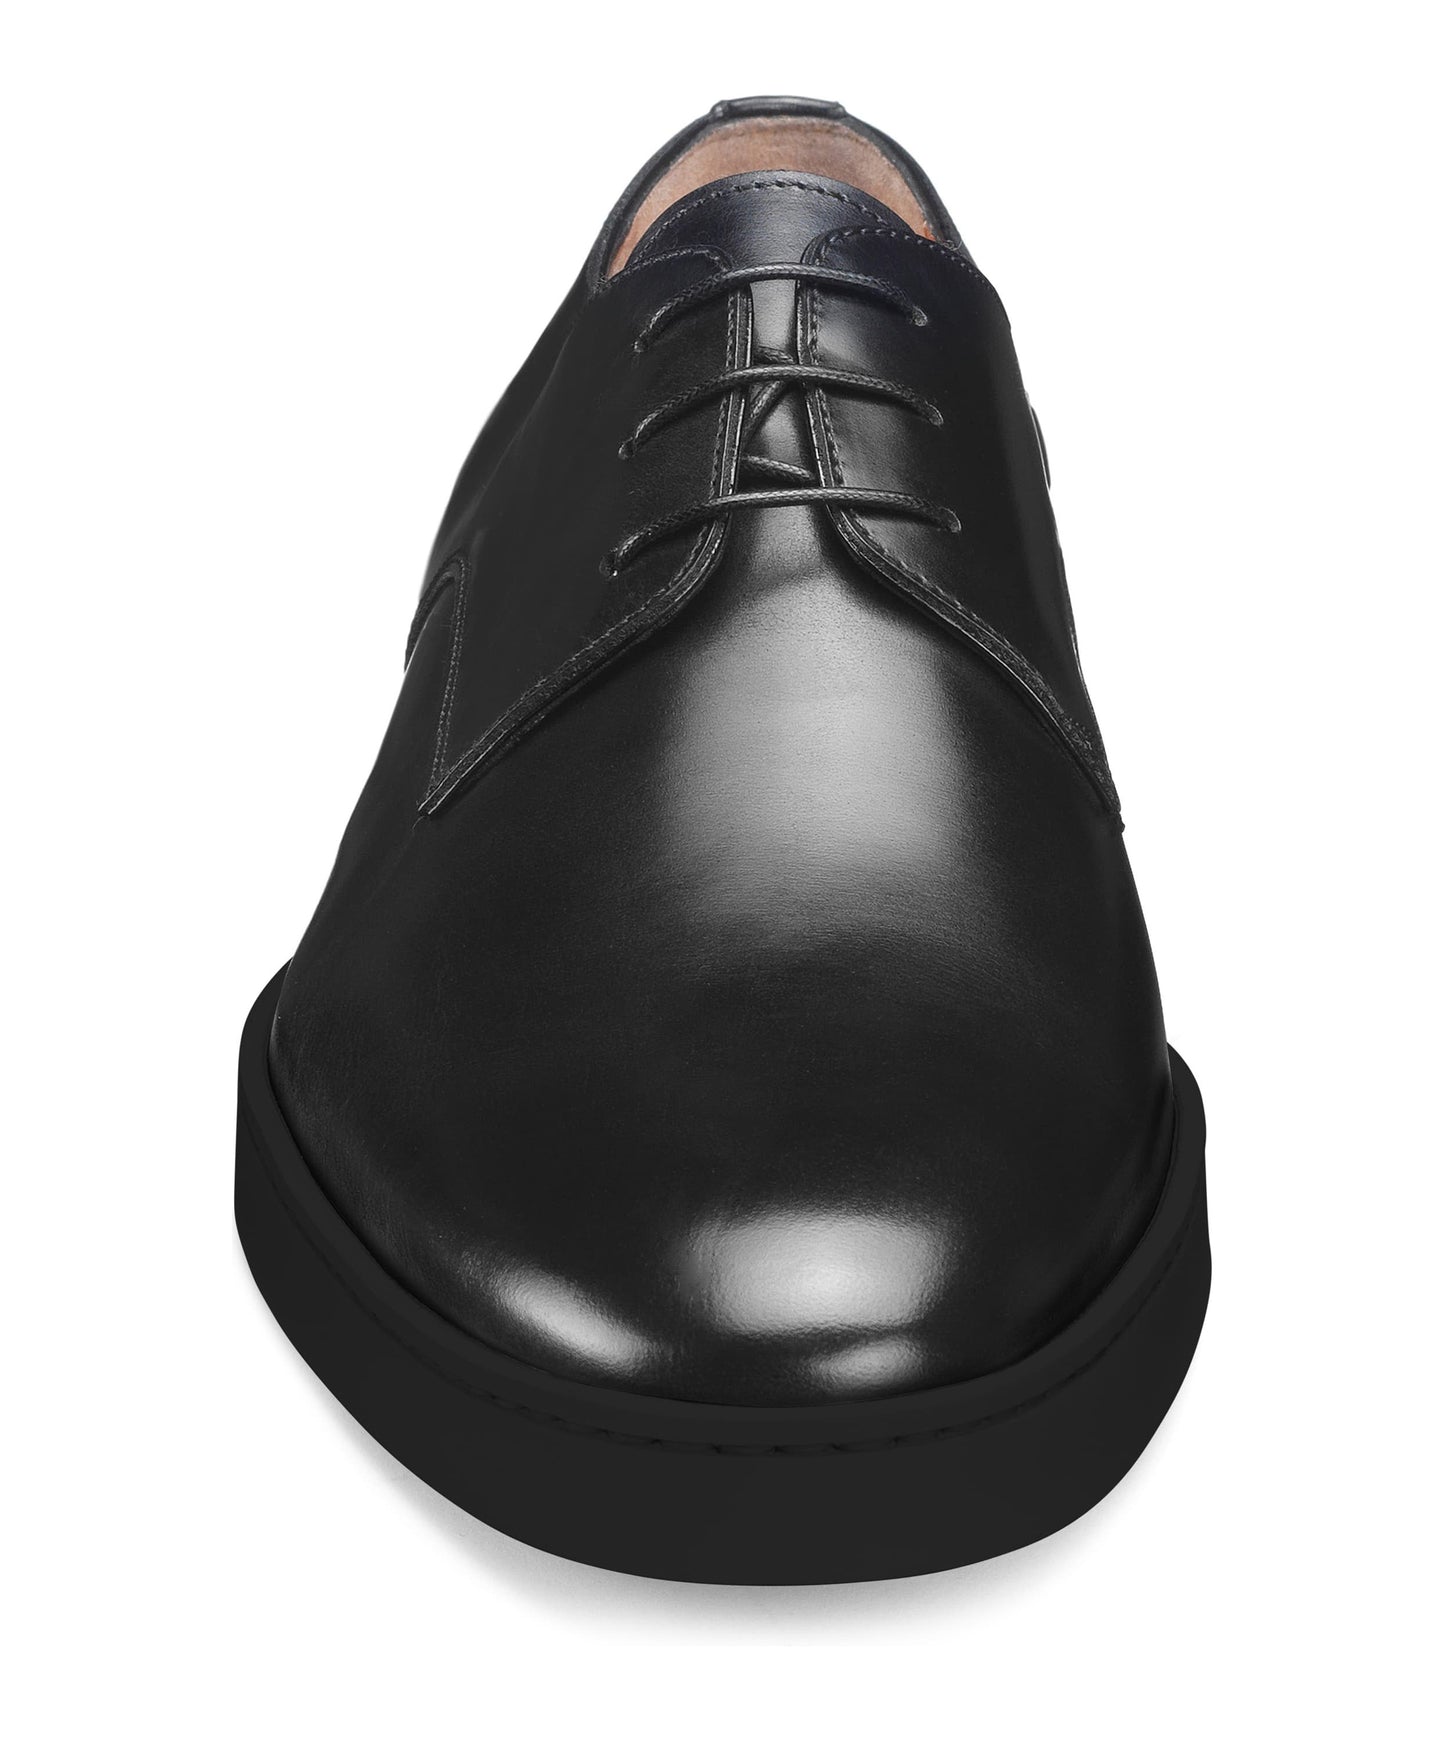 Black Formal Derby Lace Up Sneaker for Men. Black Comfortable Cup Sole.